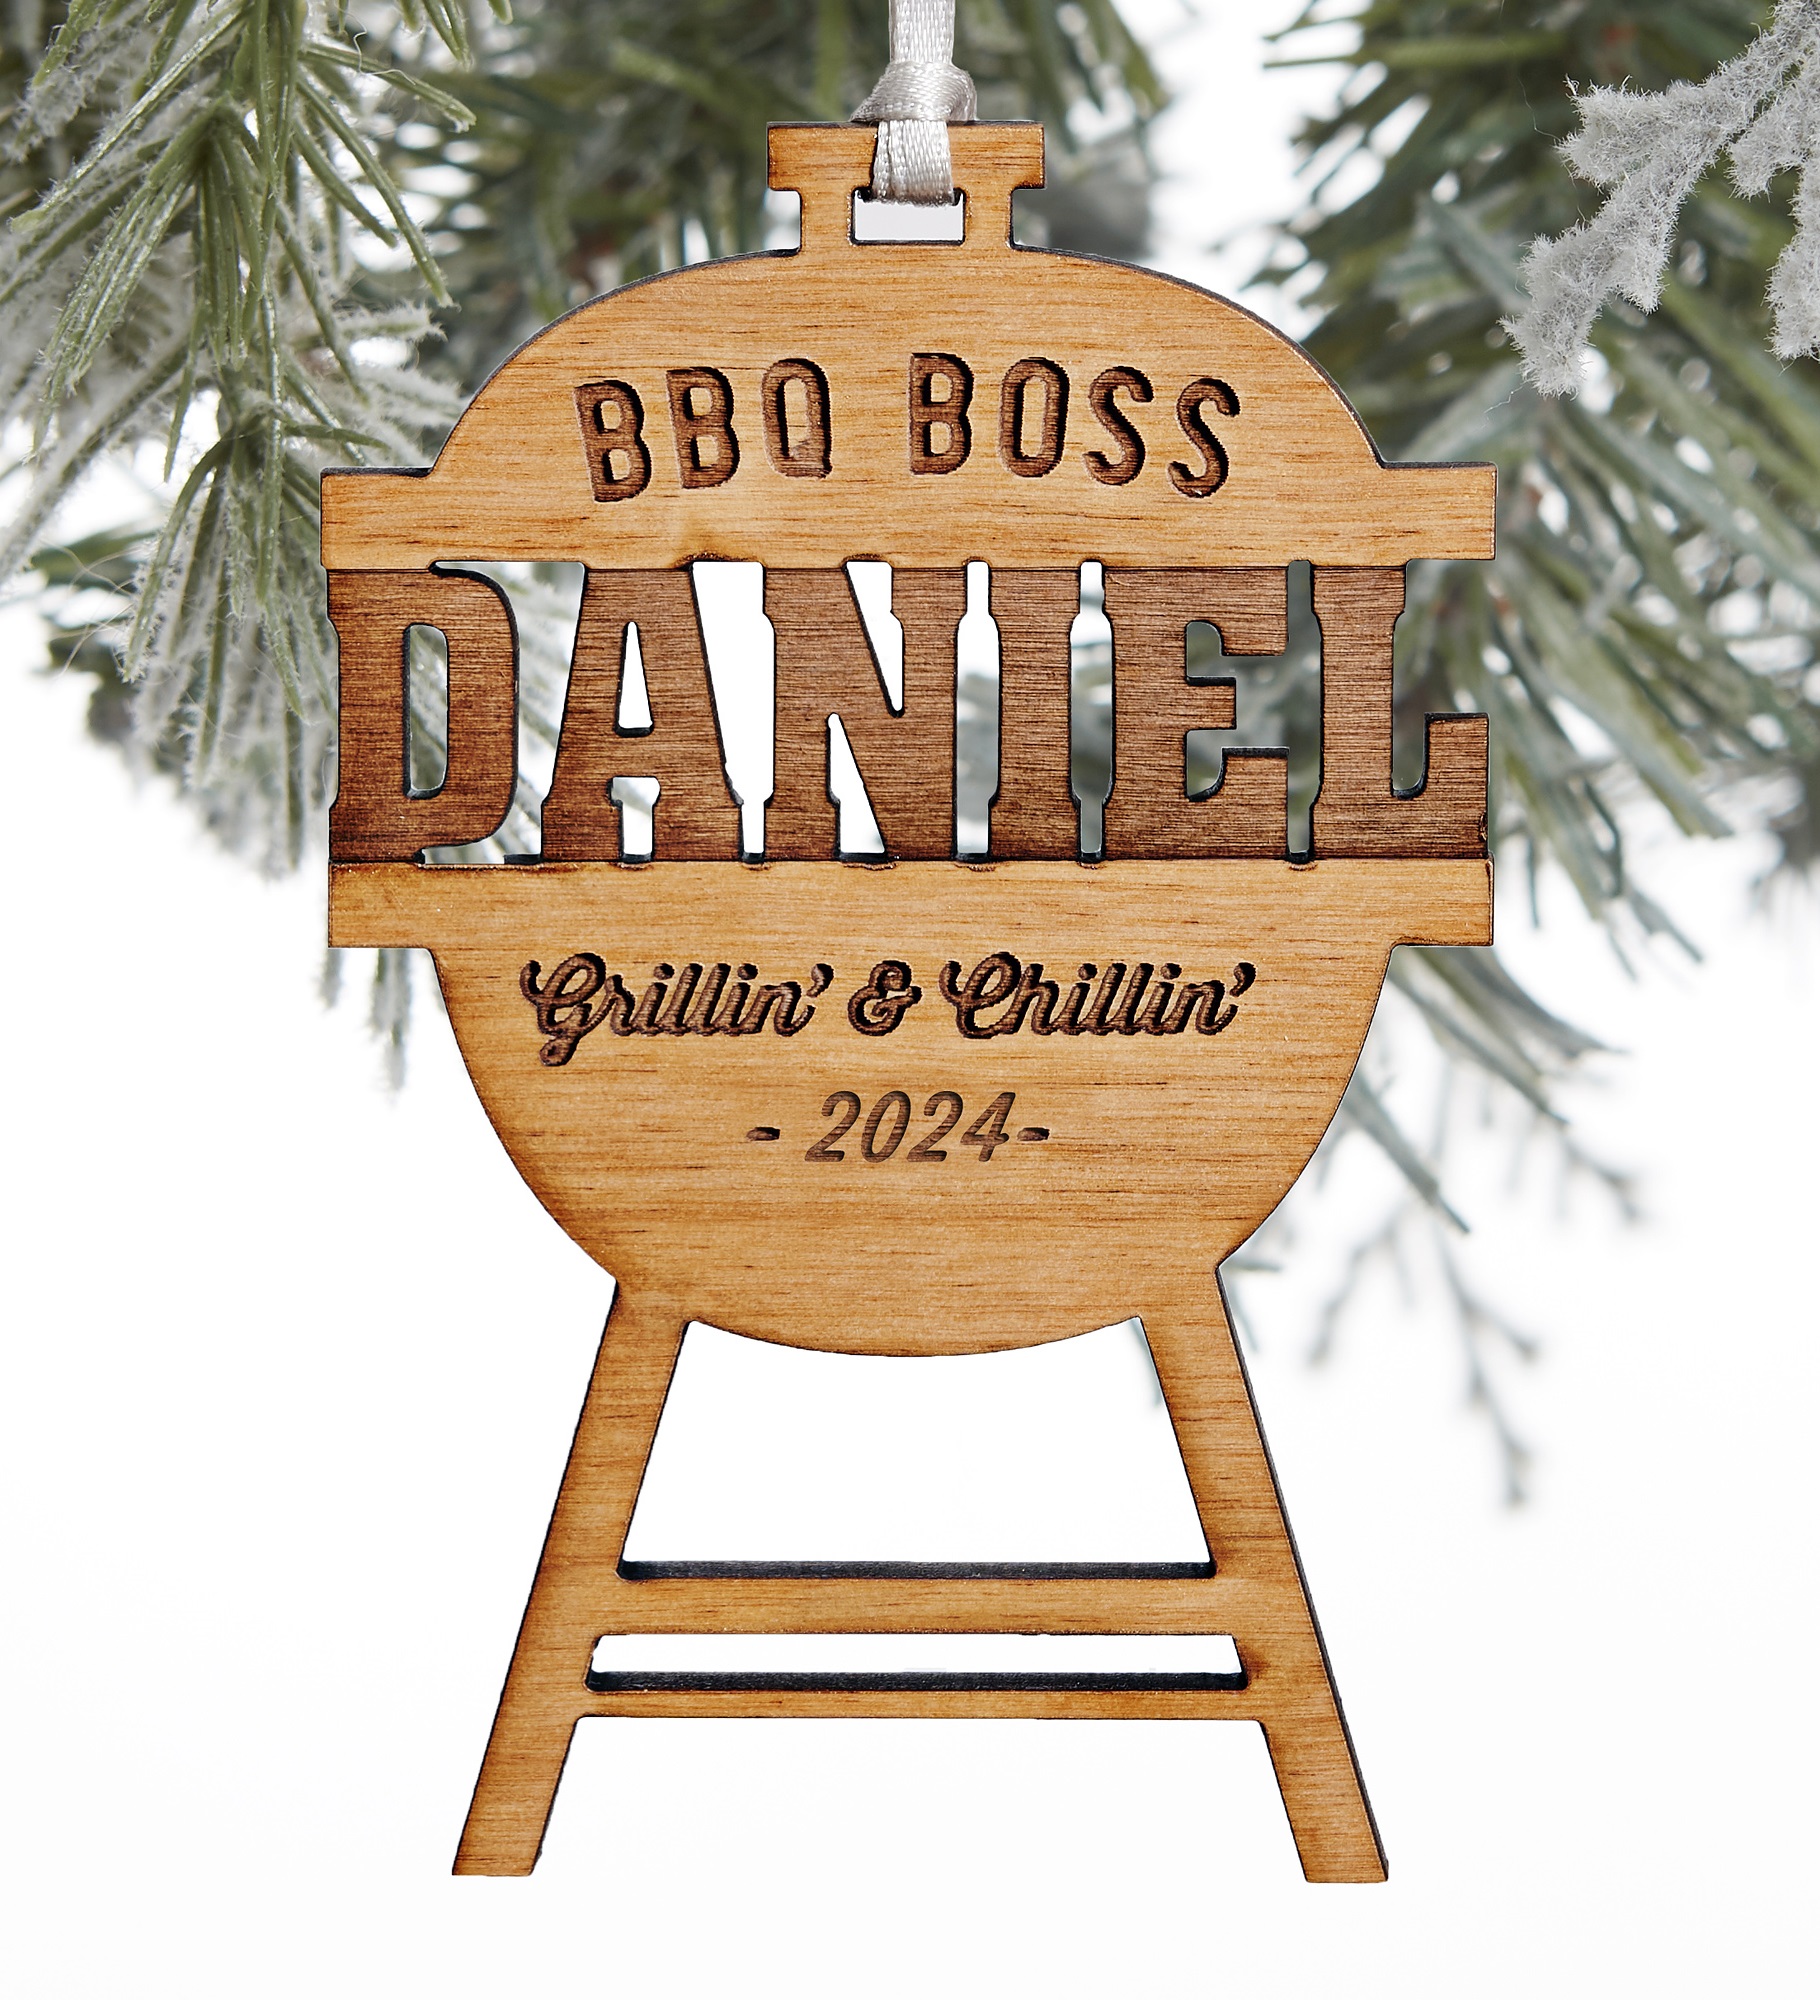 BBQ Boss Grill Engraved Wood Ornament